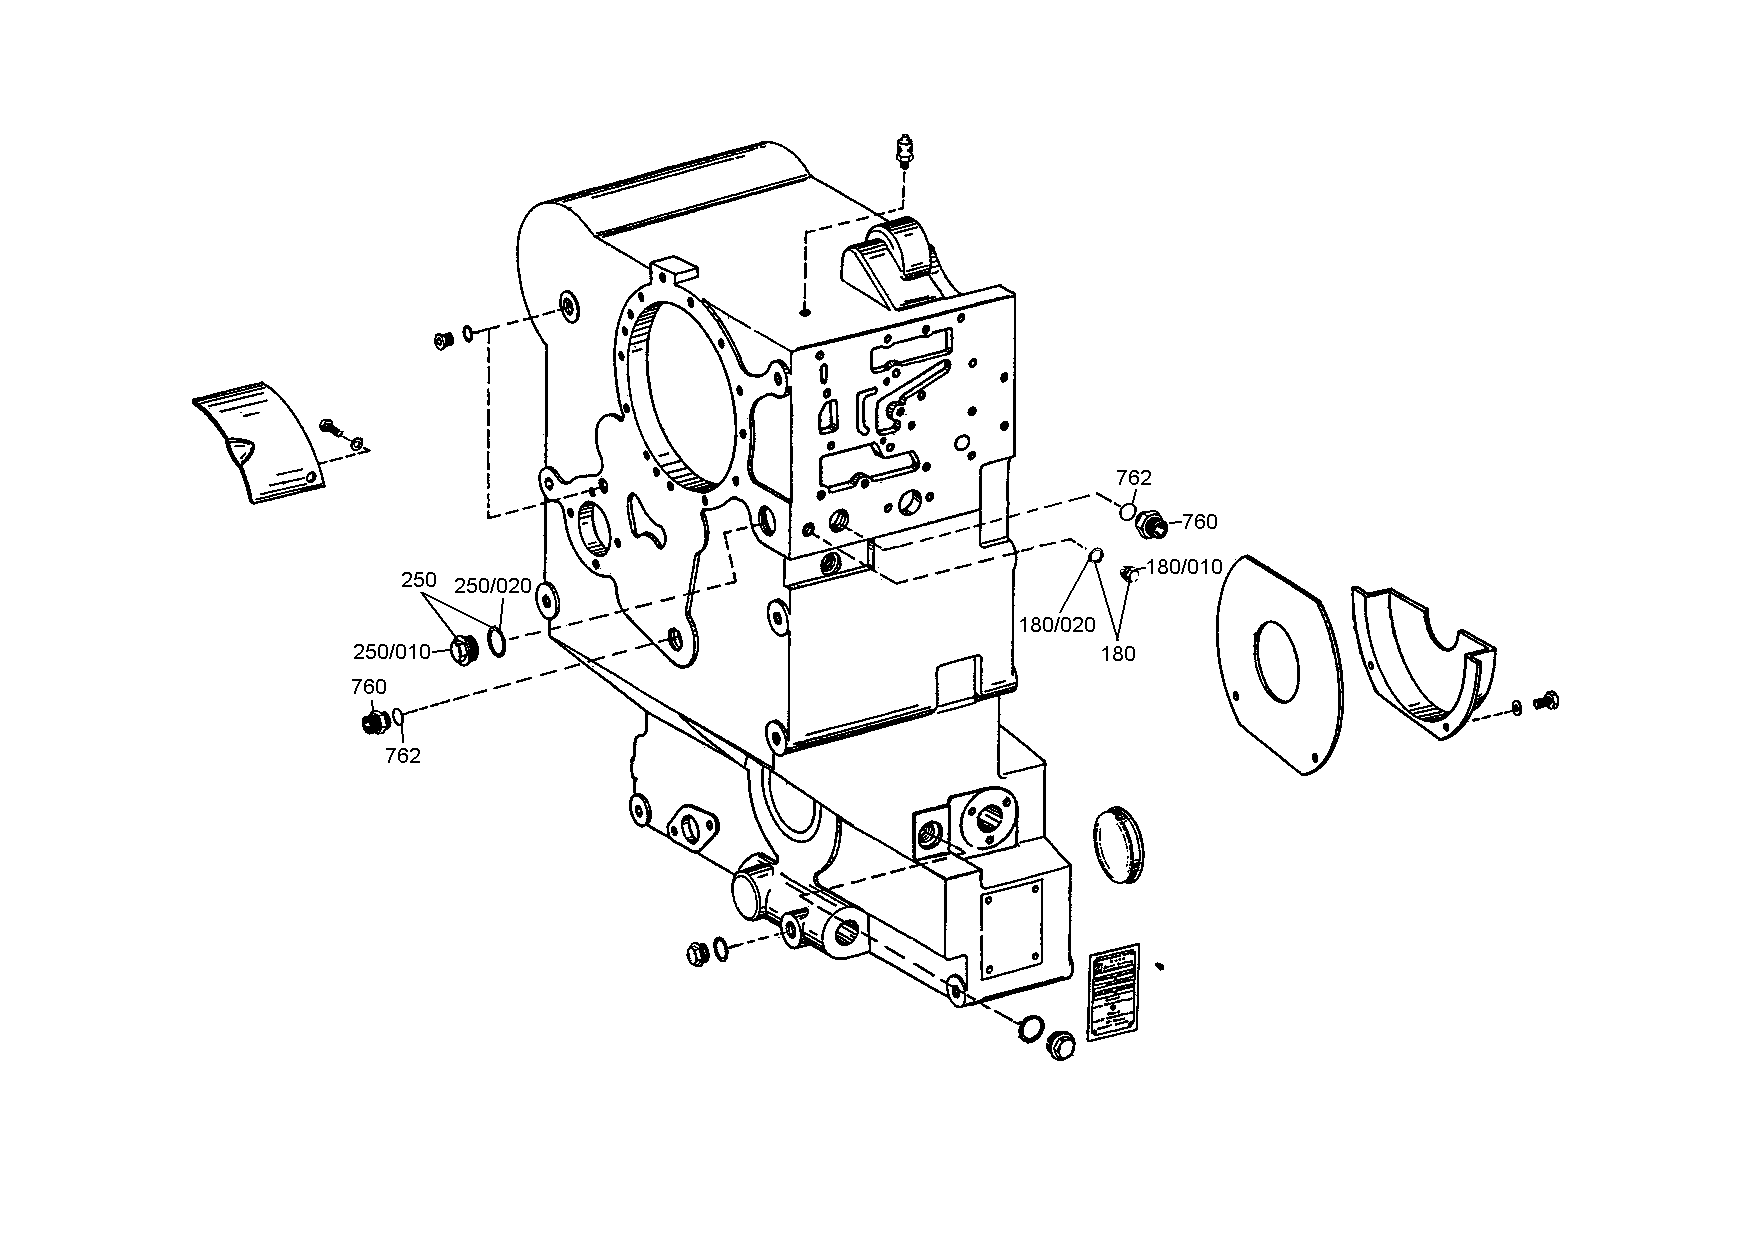 drawing for NACCO-IRV 0378516 - ADAPTER (figure 2)